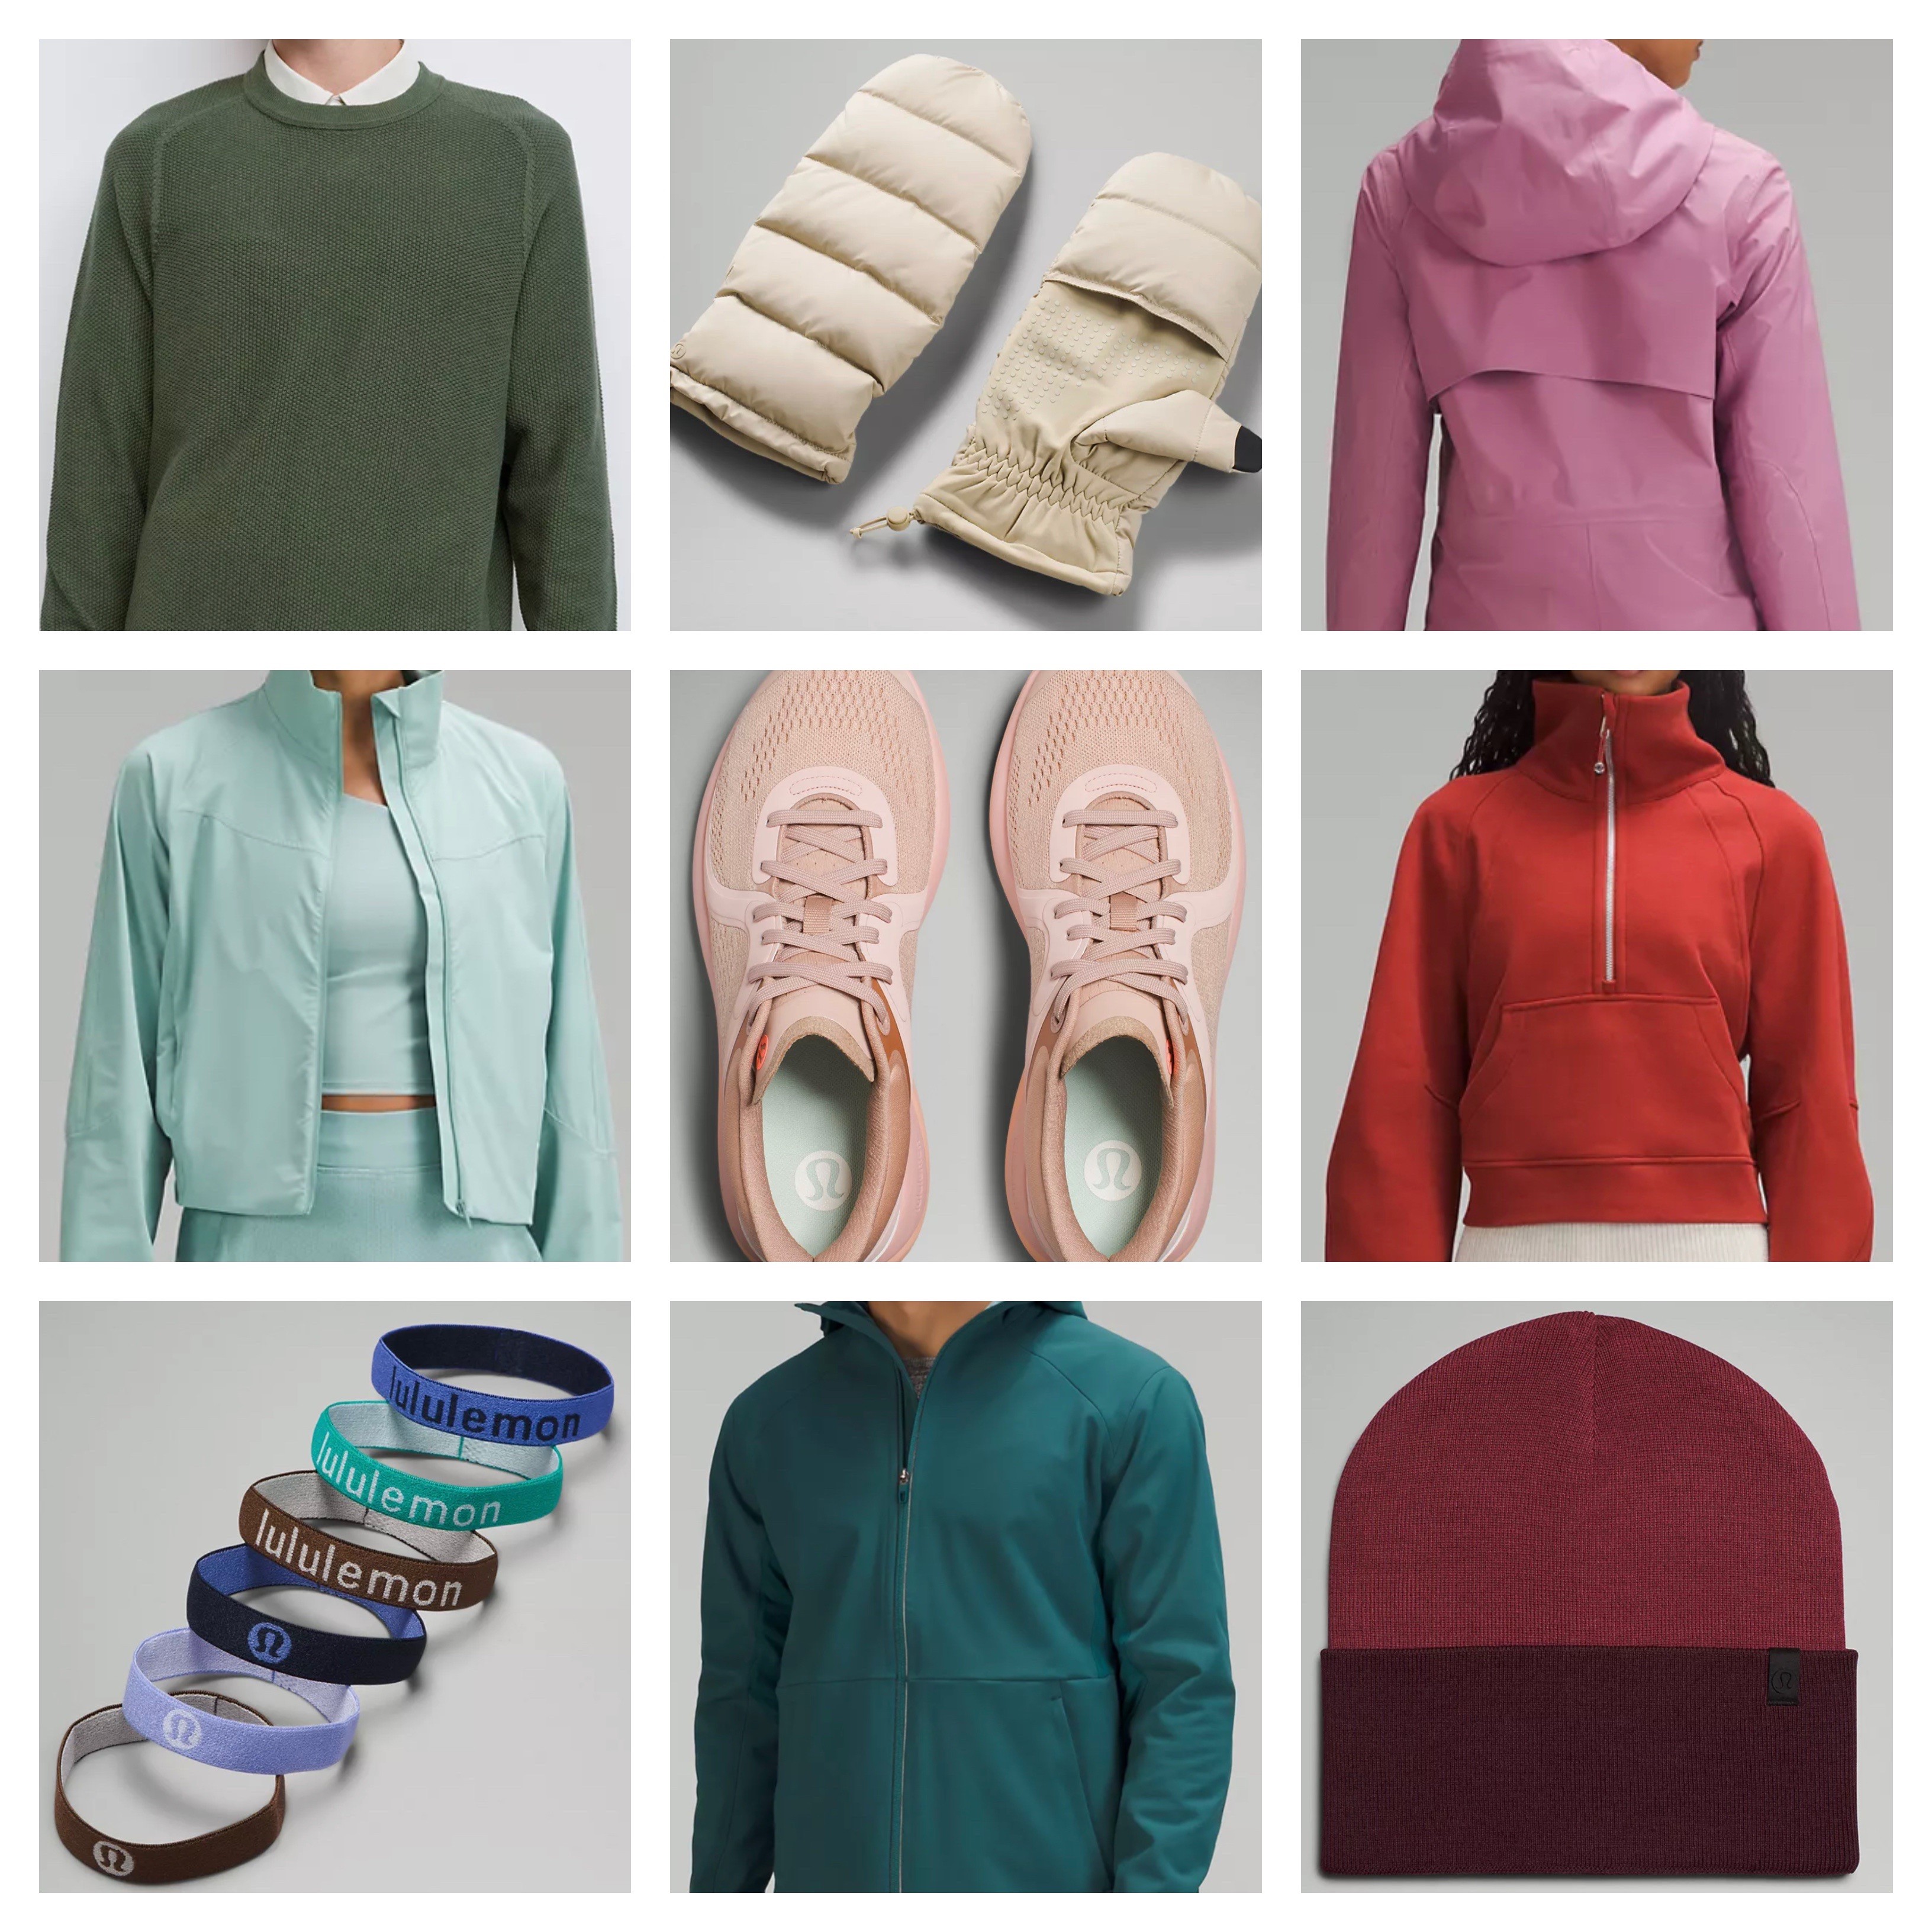 lululemon We Made Too Much restock sale: mittens, winter hats, jackets, more  